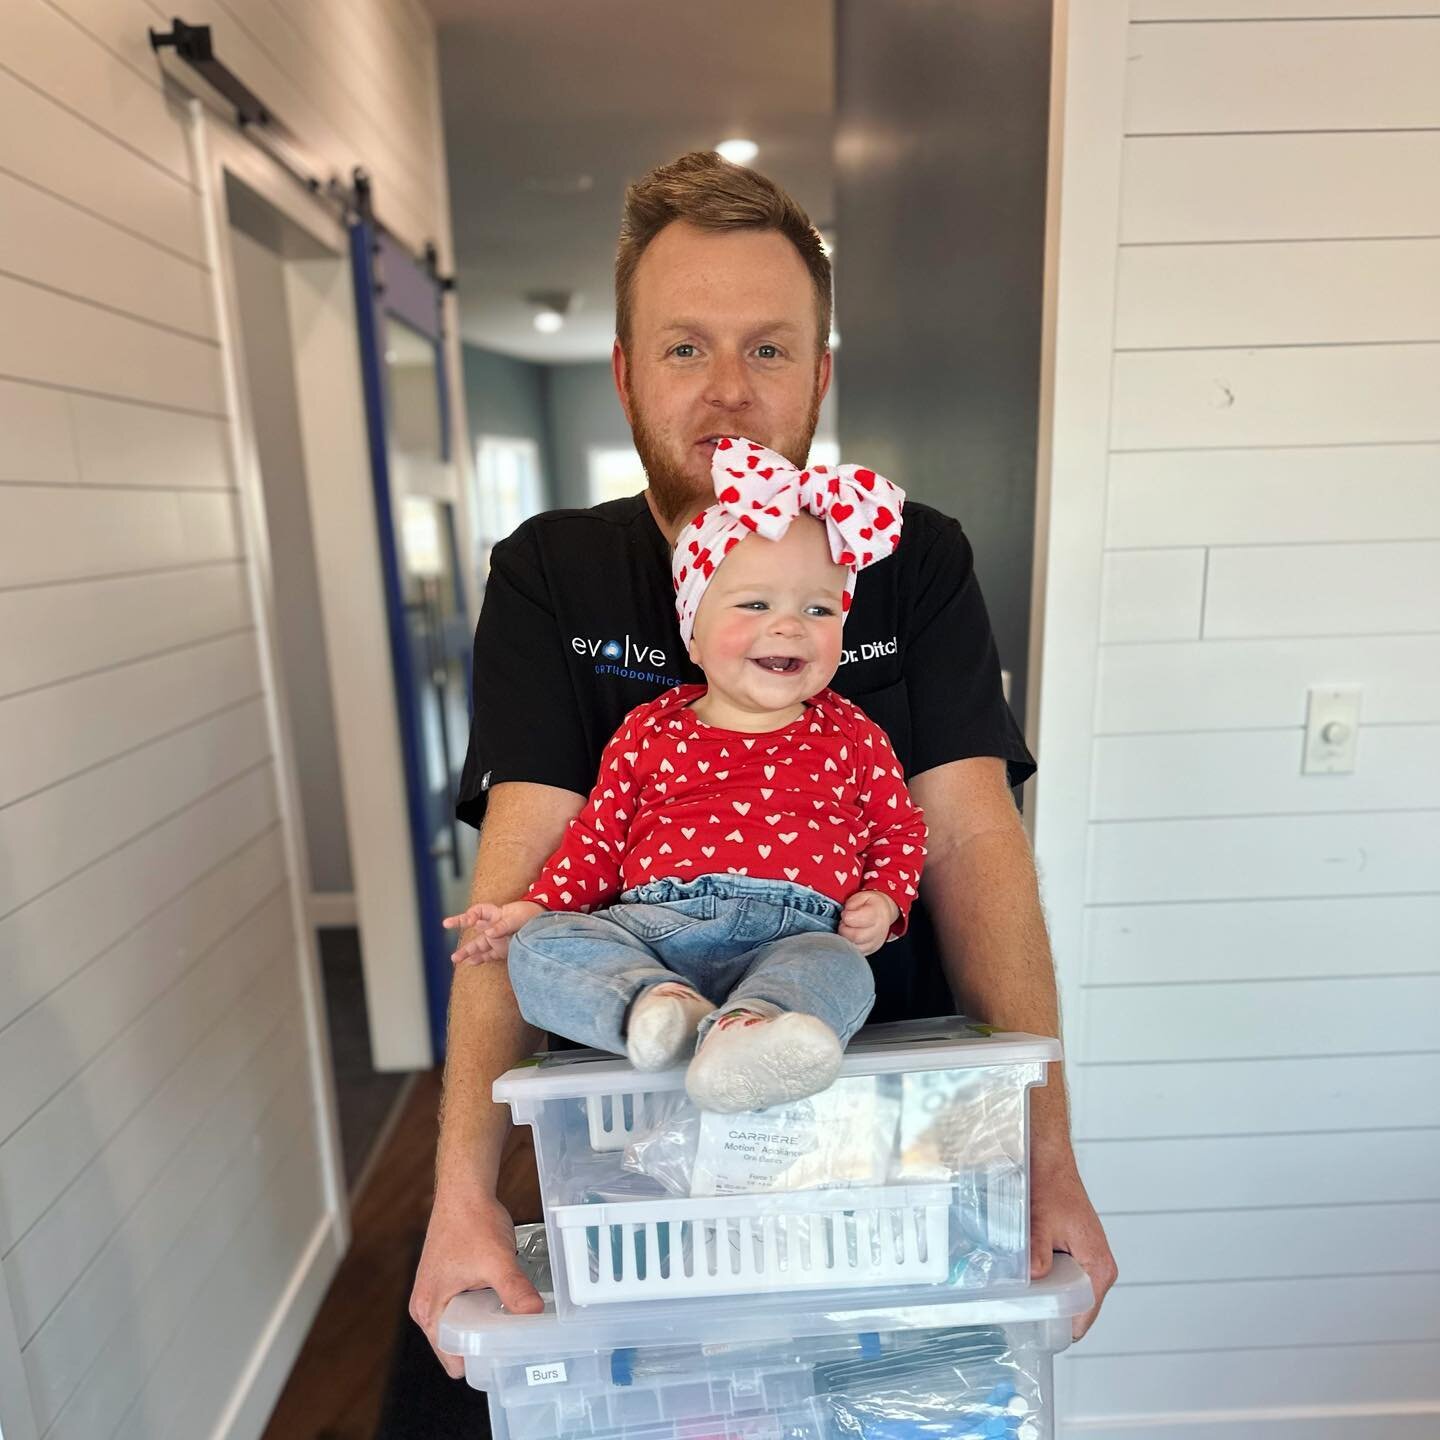 Dr.Ditch had a little extra help packing the vehicle to travel to the Pelican Rapids office!